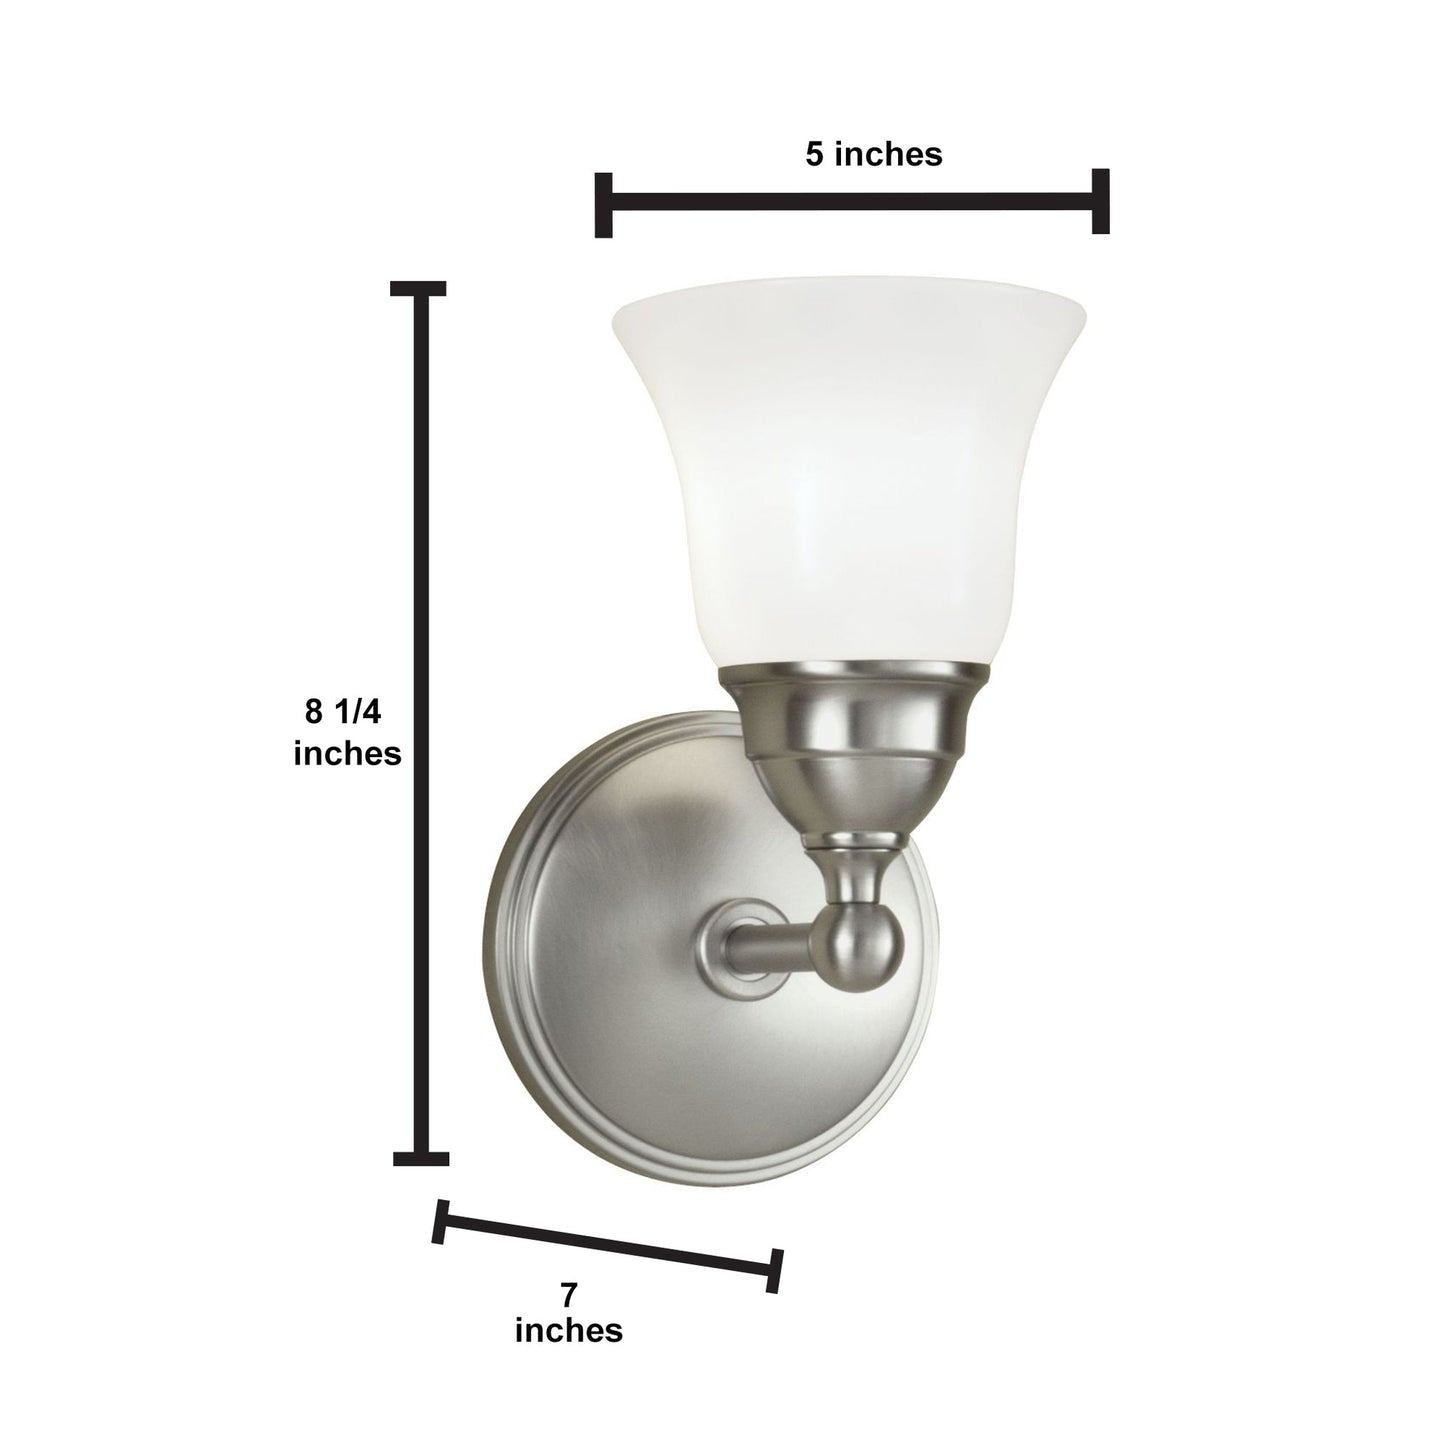 Norwell Lighting Sophie 8" x 5" 1-Light Sconce Chrome Vanity Light With Bell Shiny Opal Glass Diffuser